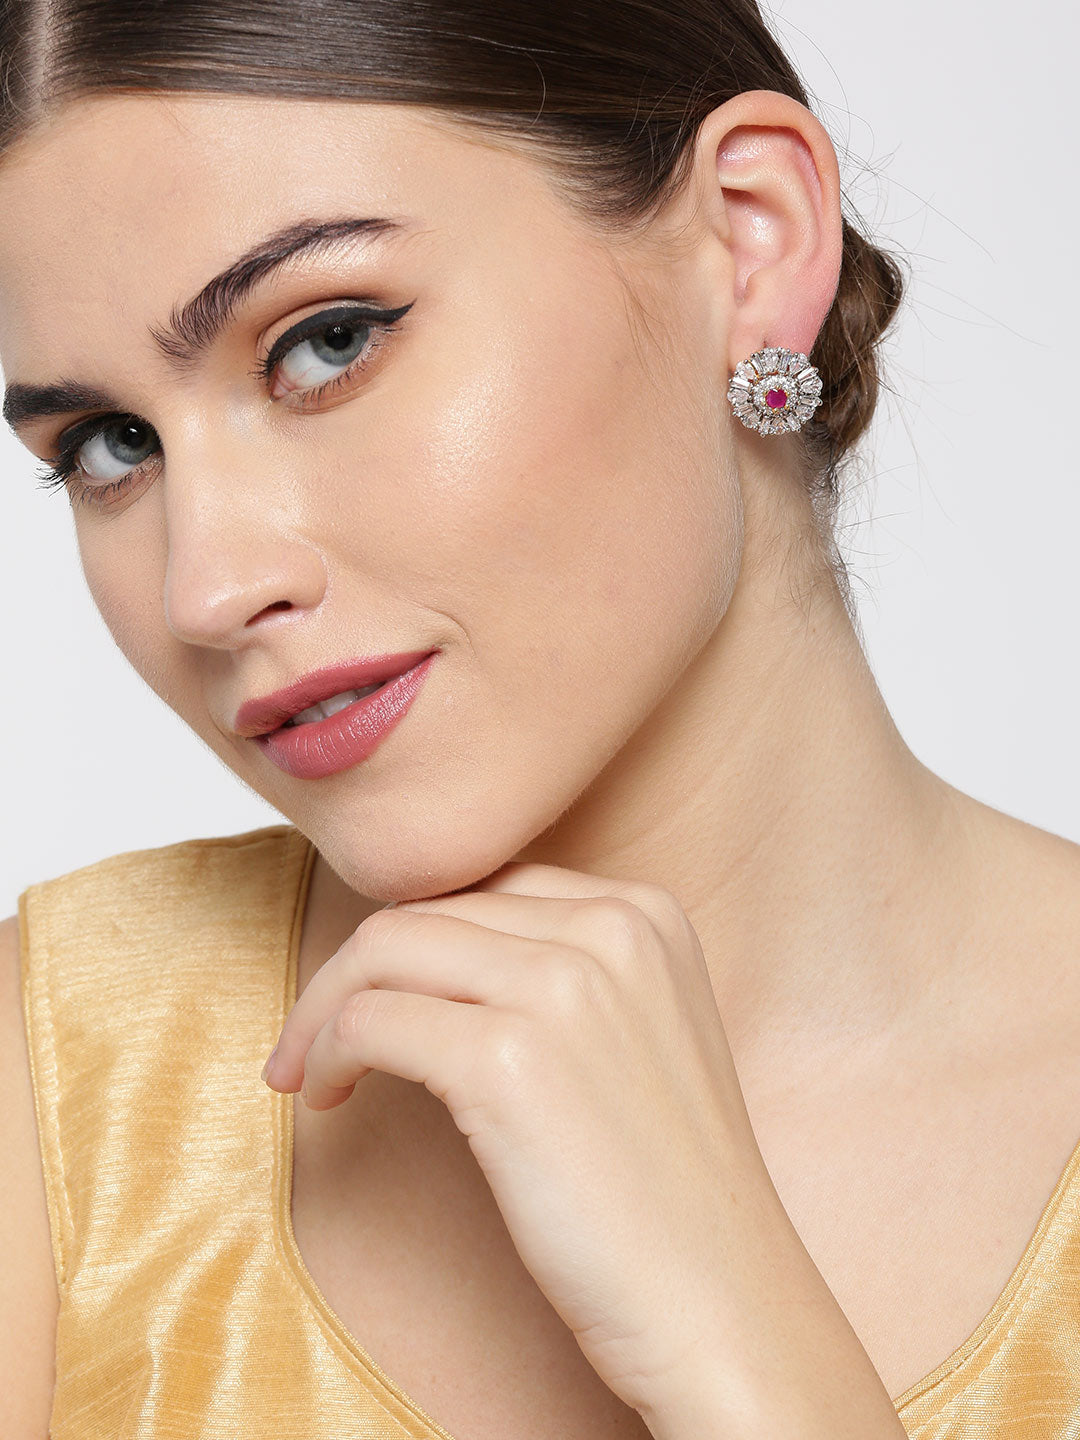 Floral Dazzle - Gold-Plated American Diamond and Ruby Studded Stud Earrings